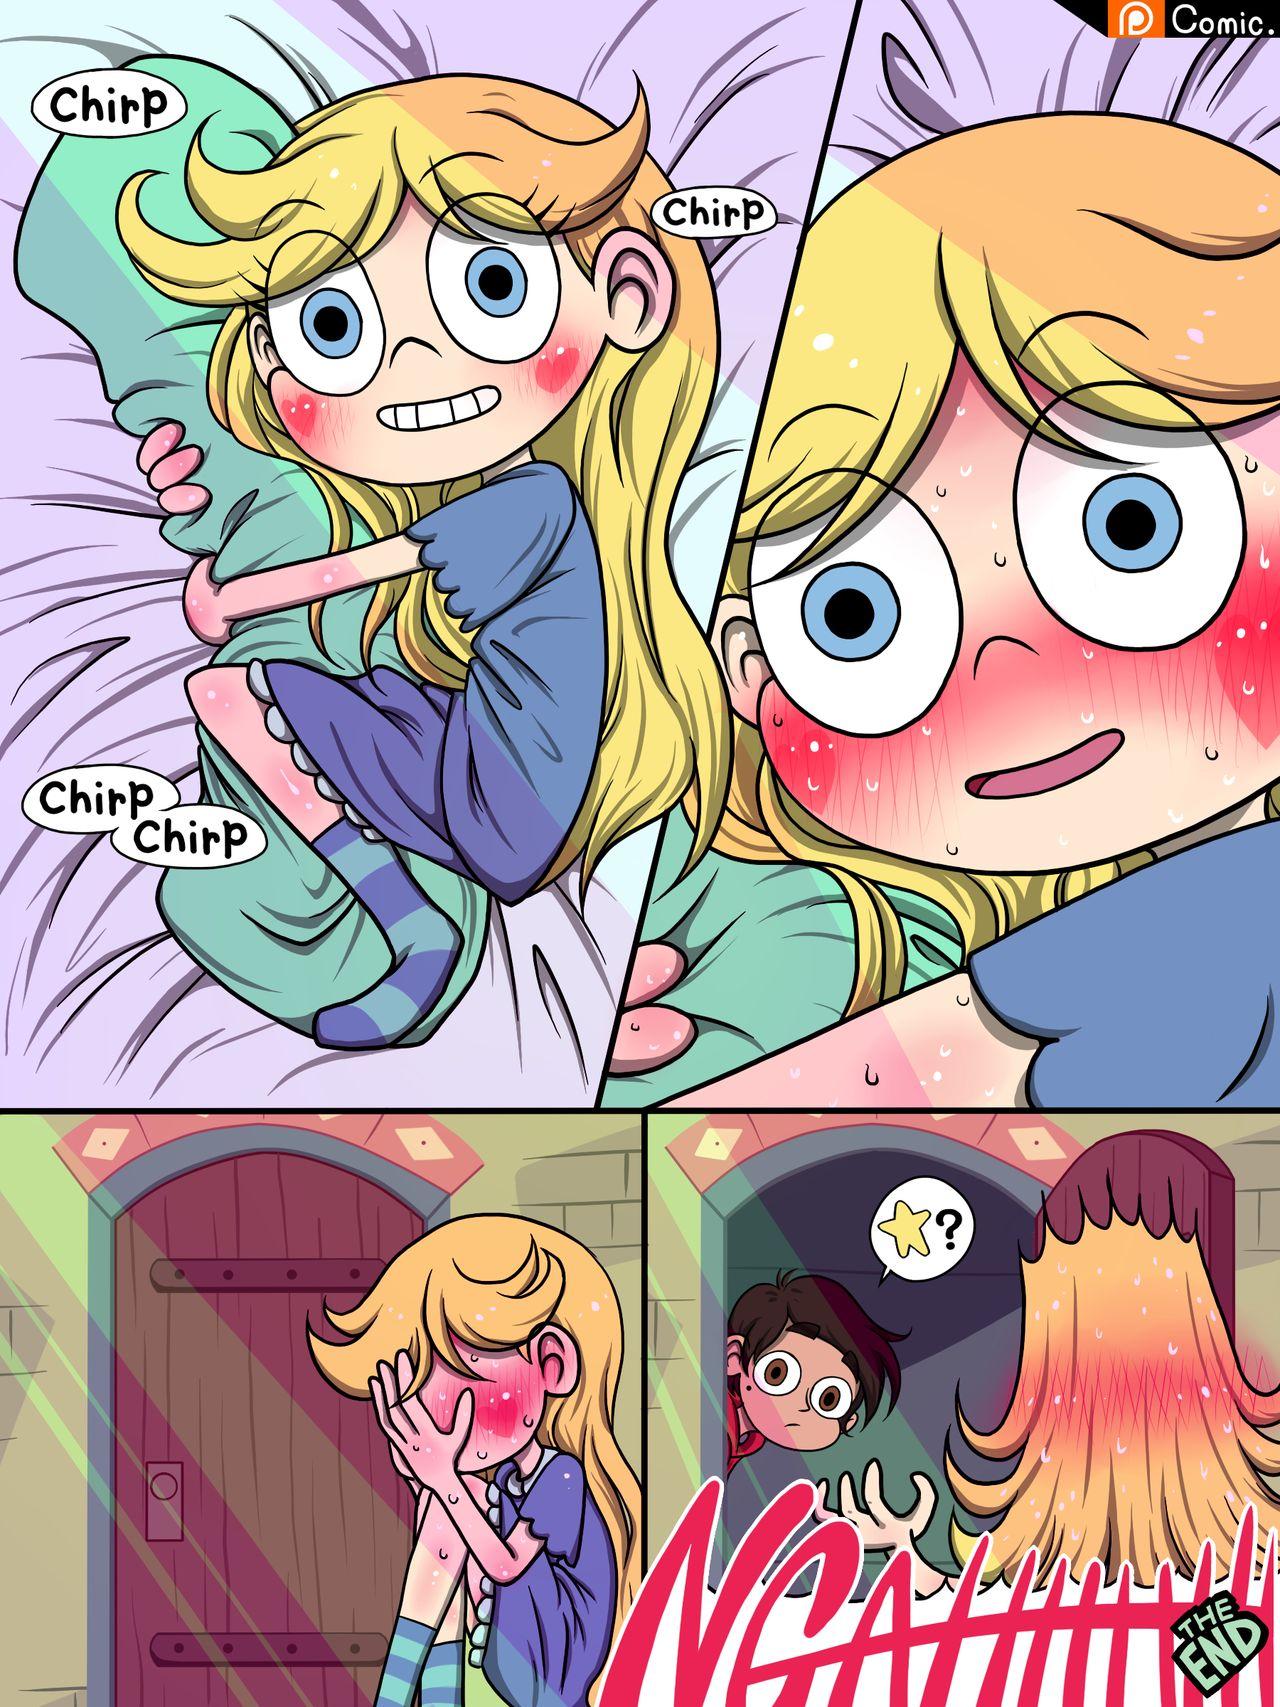 Love Foces of Dream - Star vs. the forces of evil Monstercock - Page 8